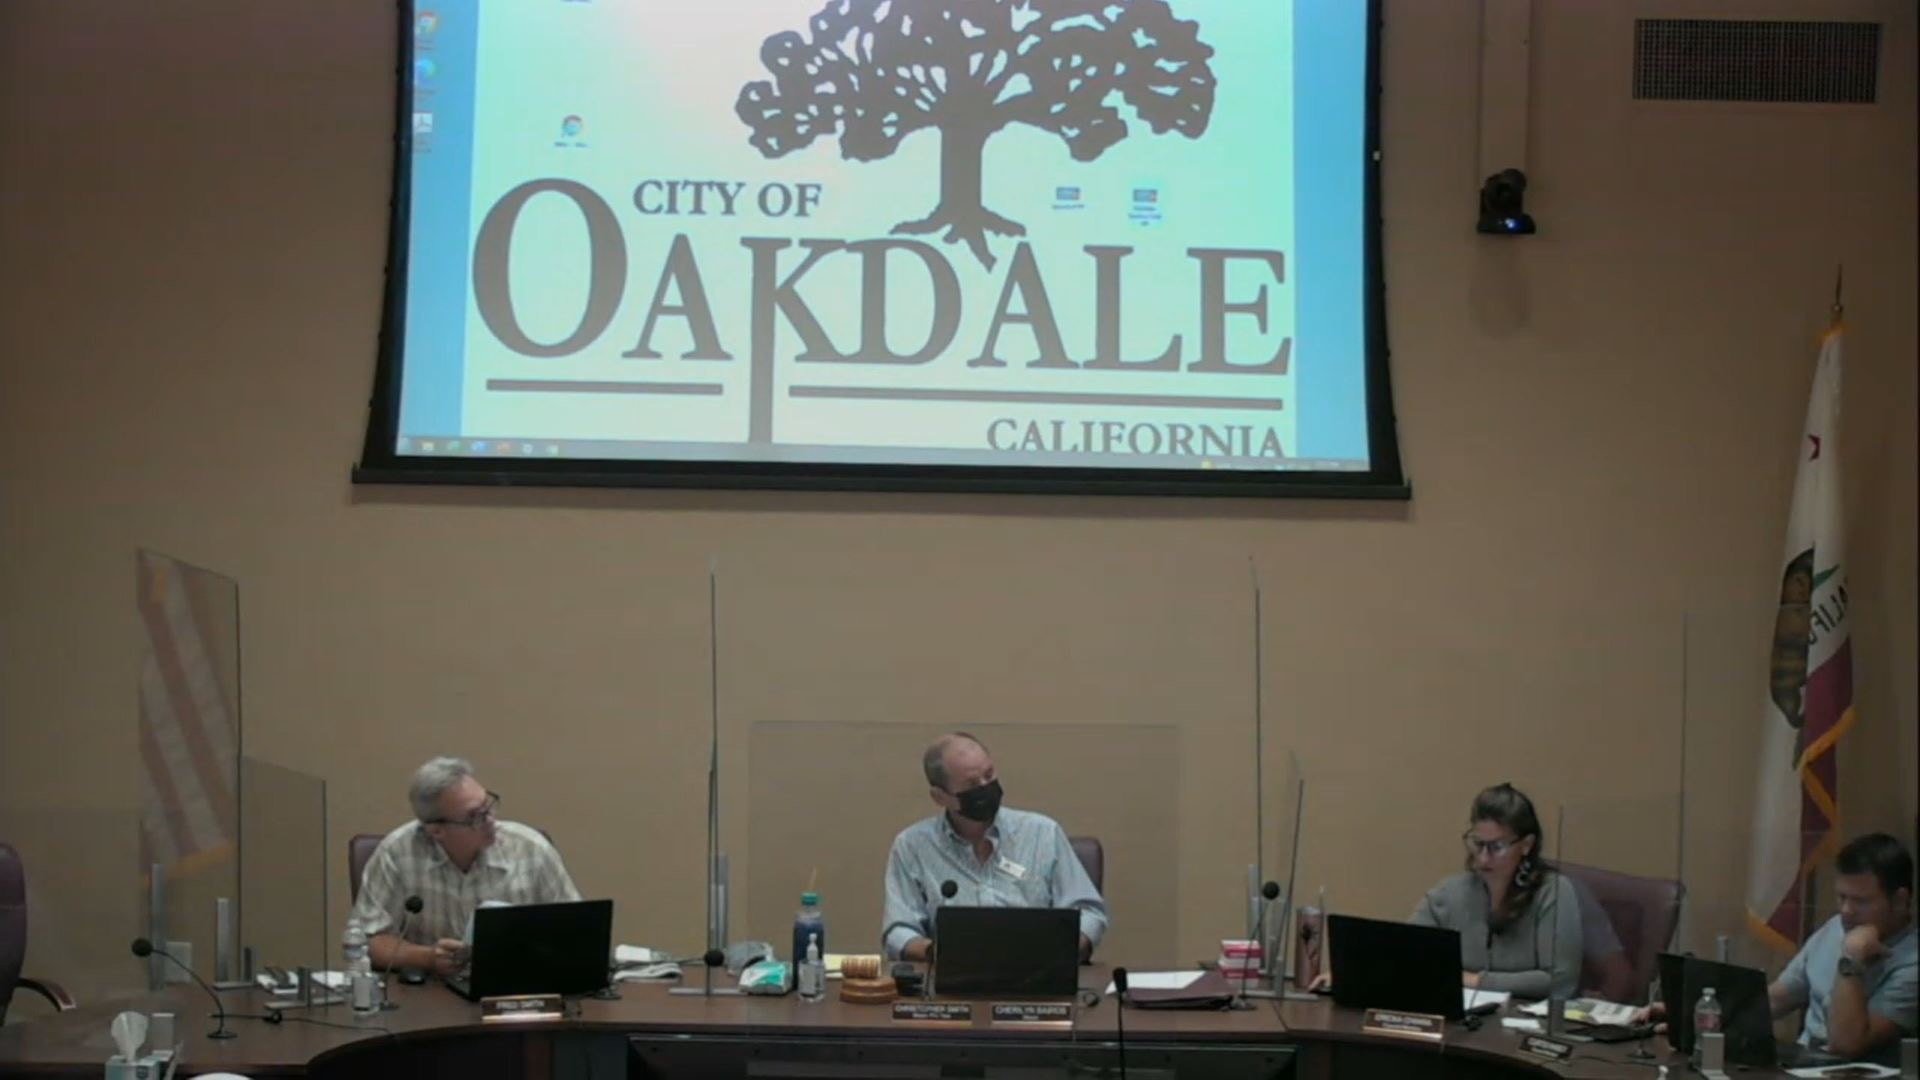 Lena Howland was in Oakdale where multiple city councilmembers chose to not comment after openly defying mask mandates.